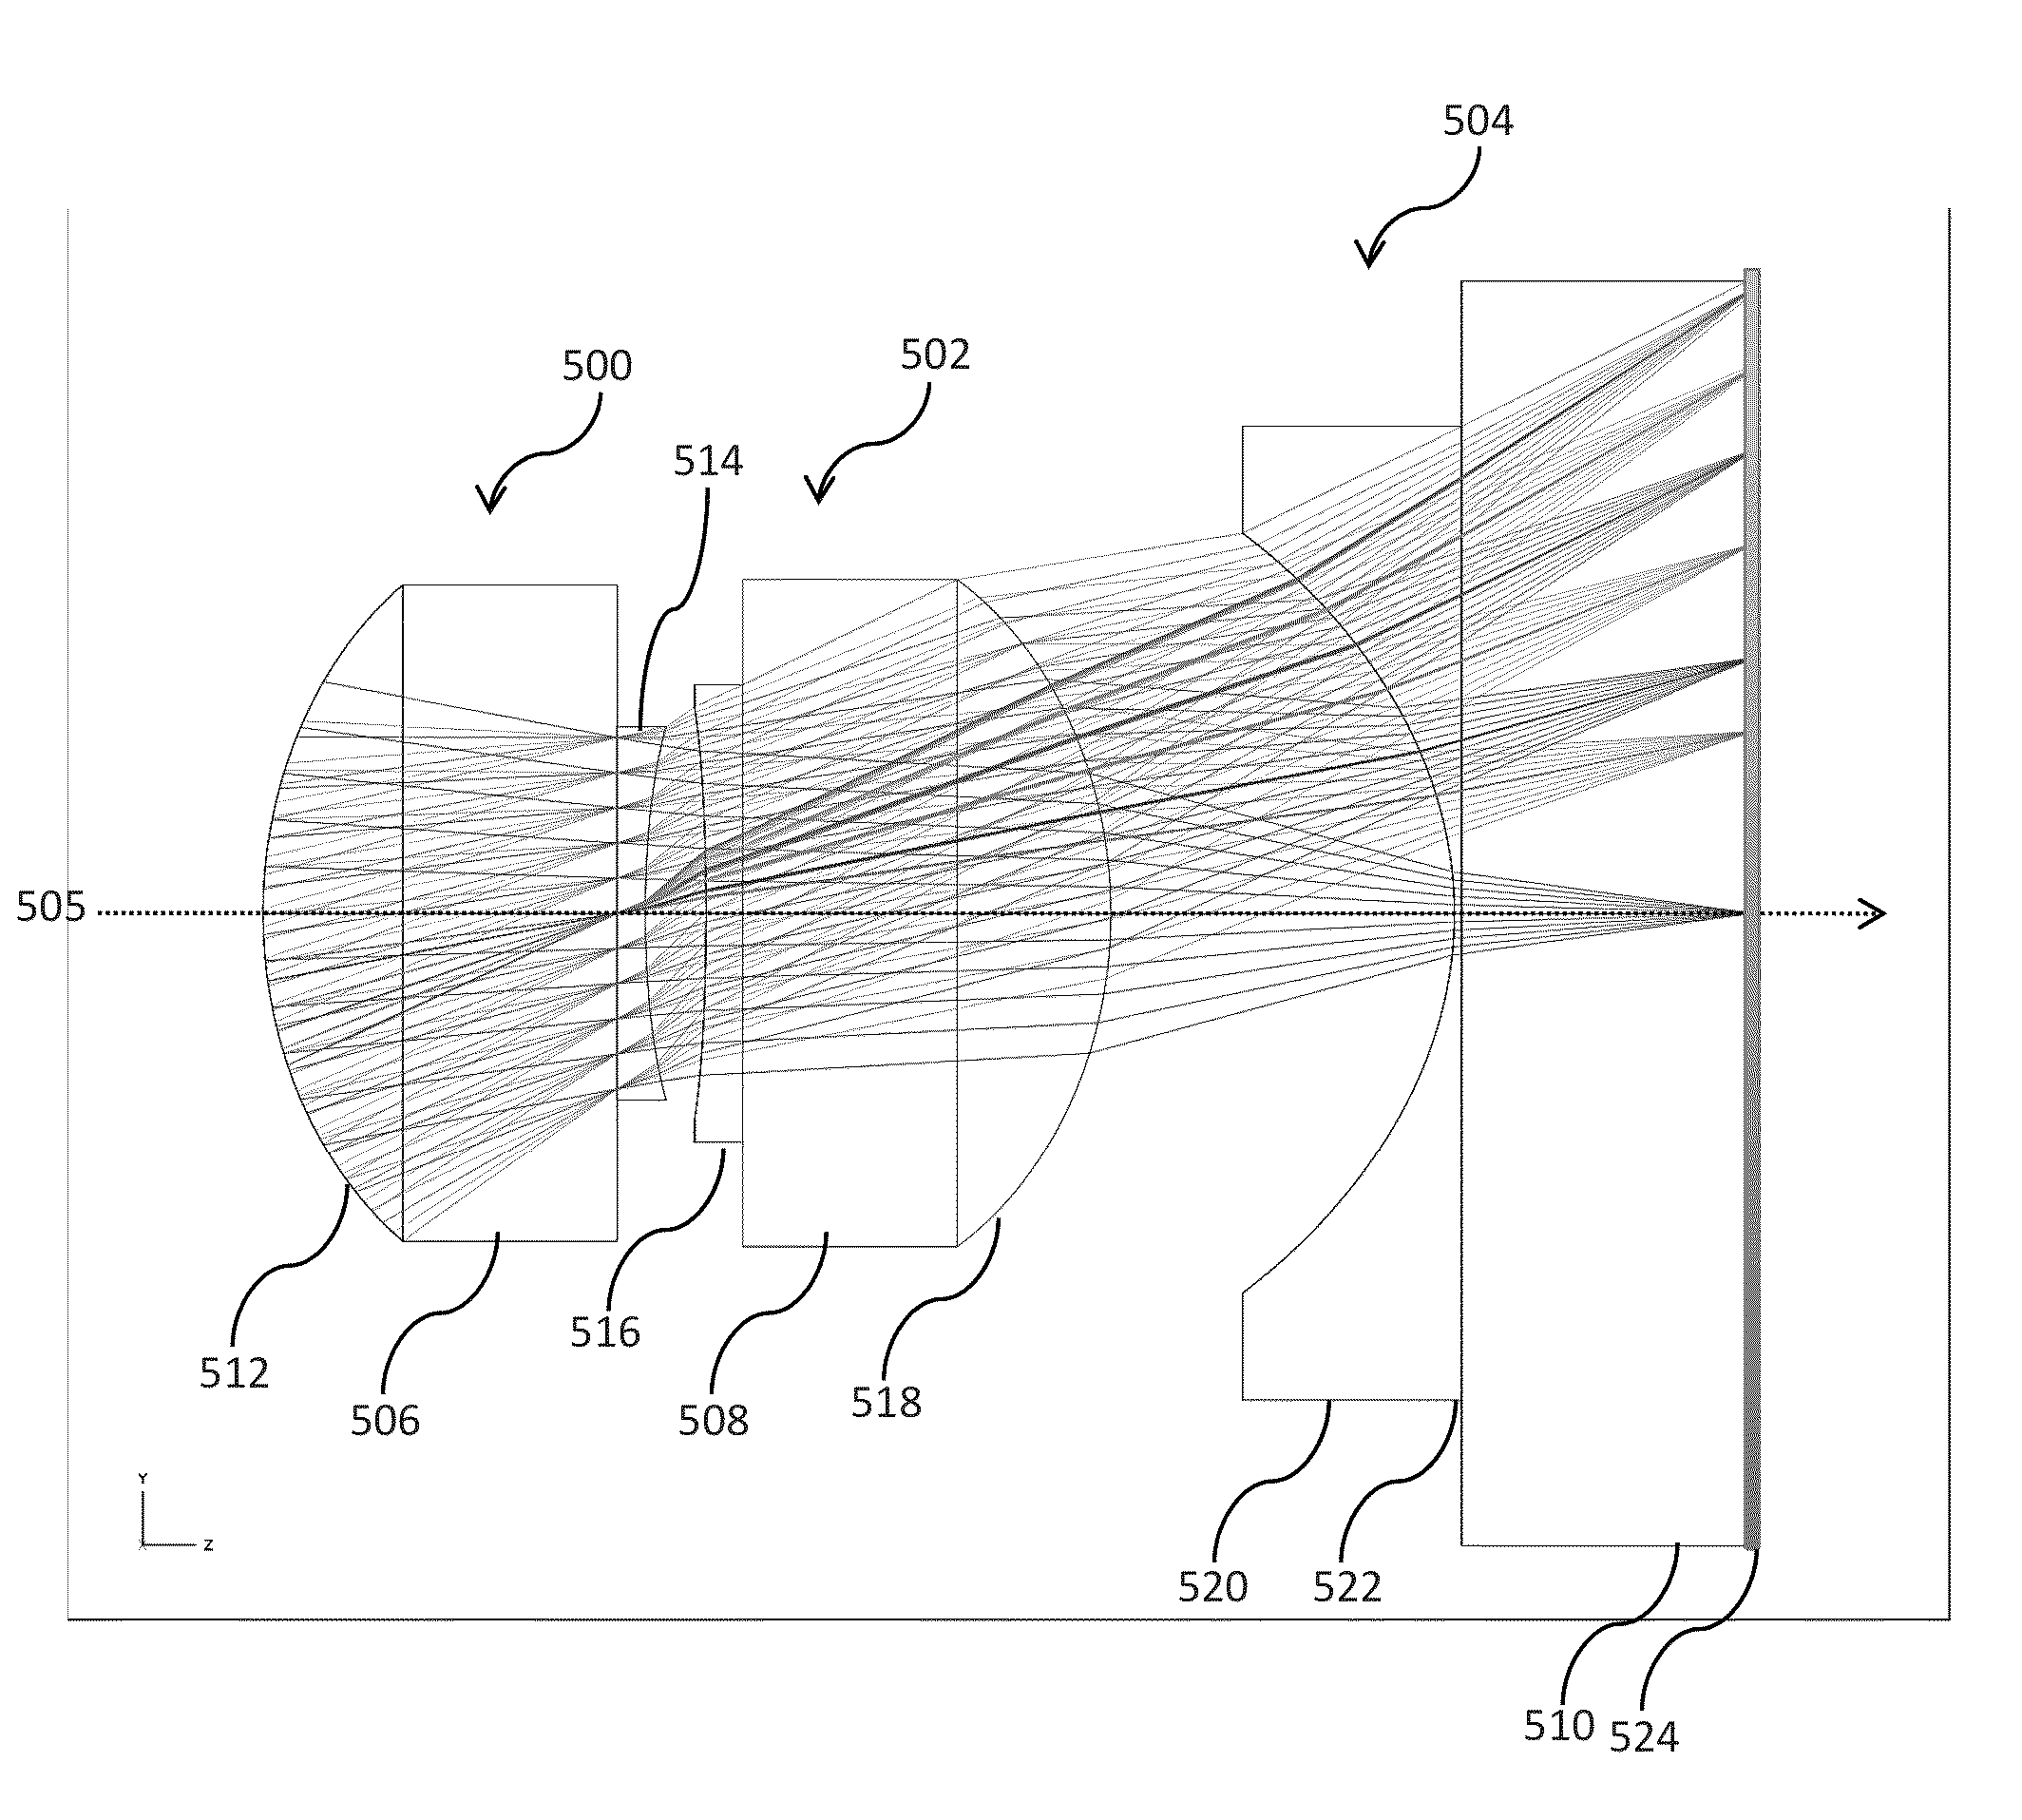 Optical arrangements for use with an array camera